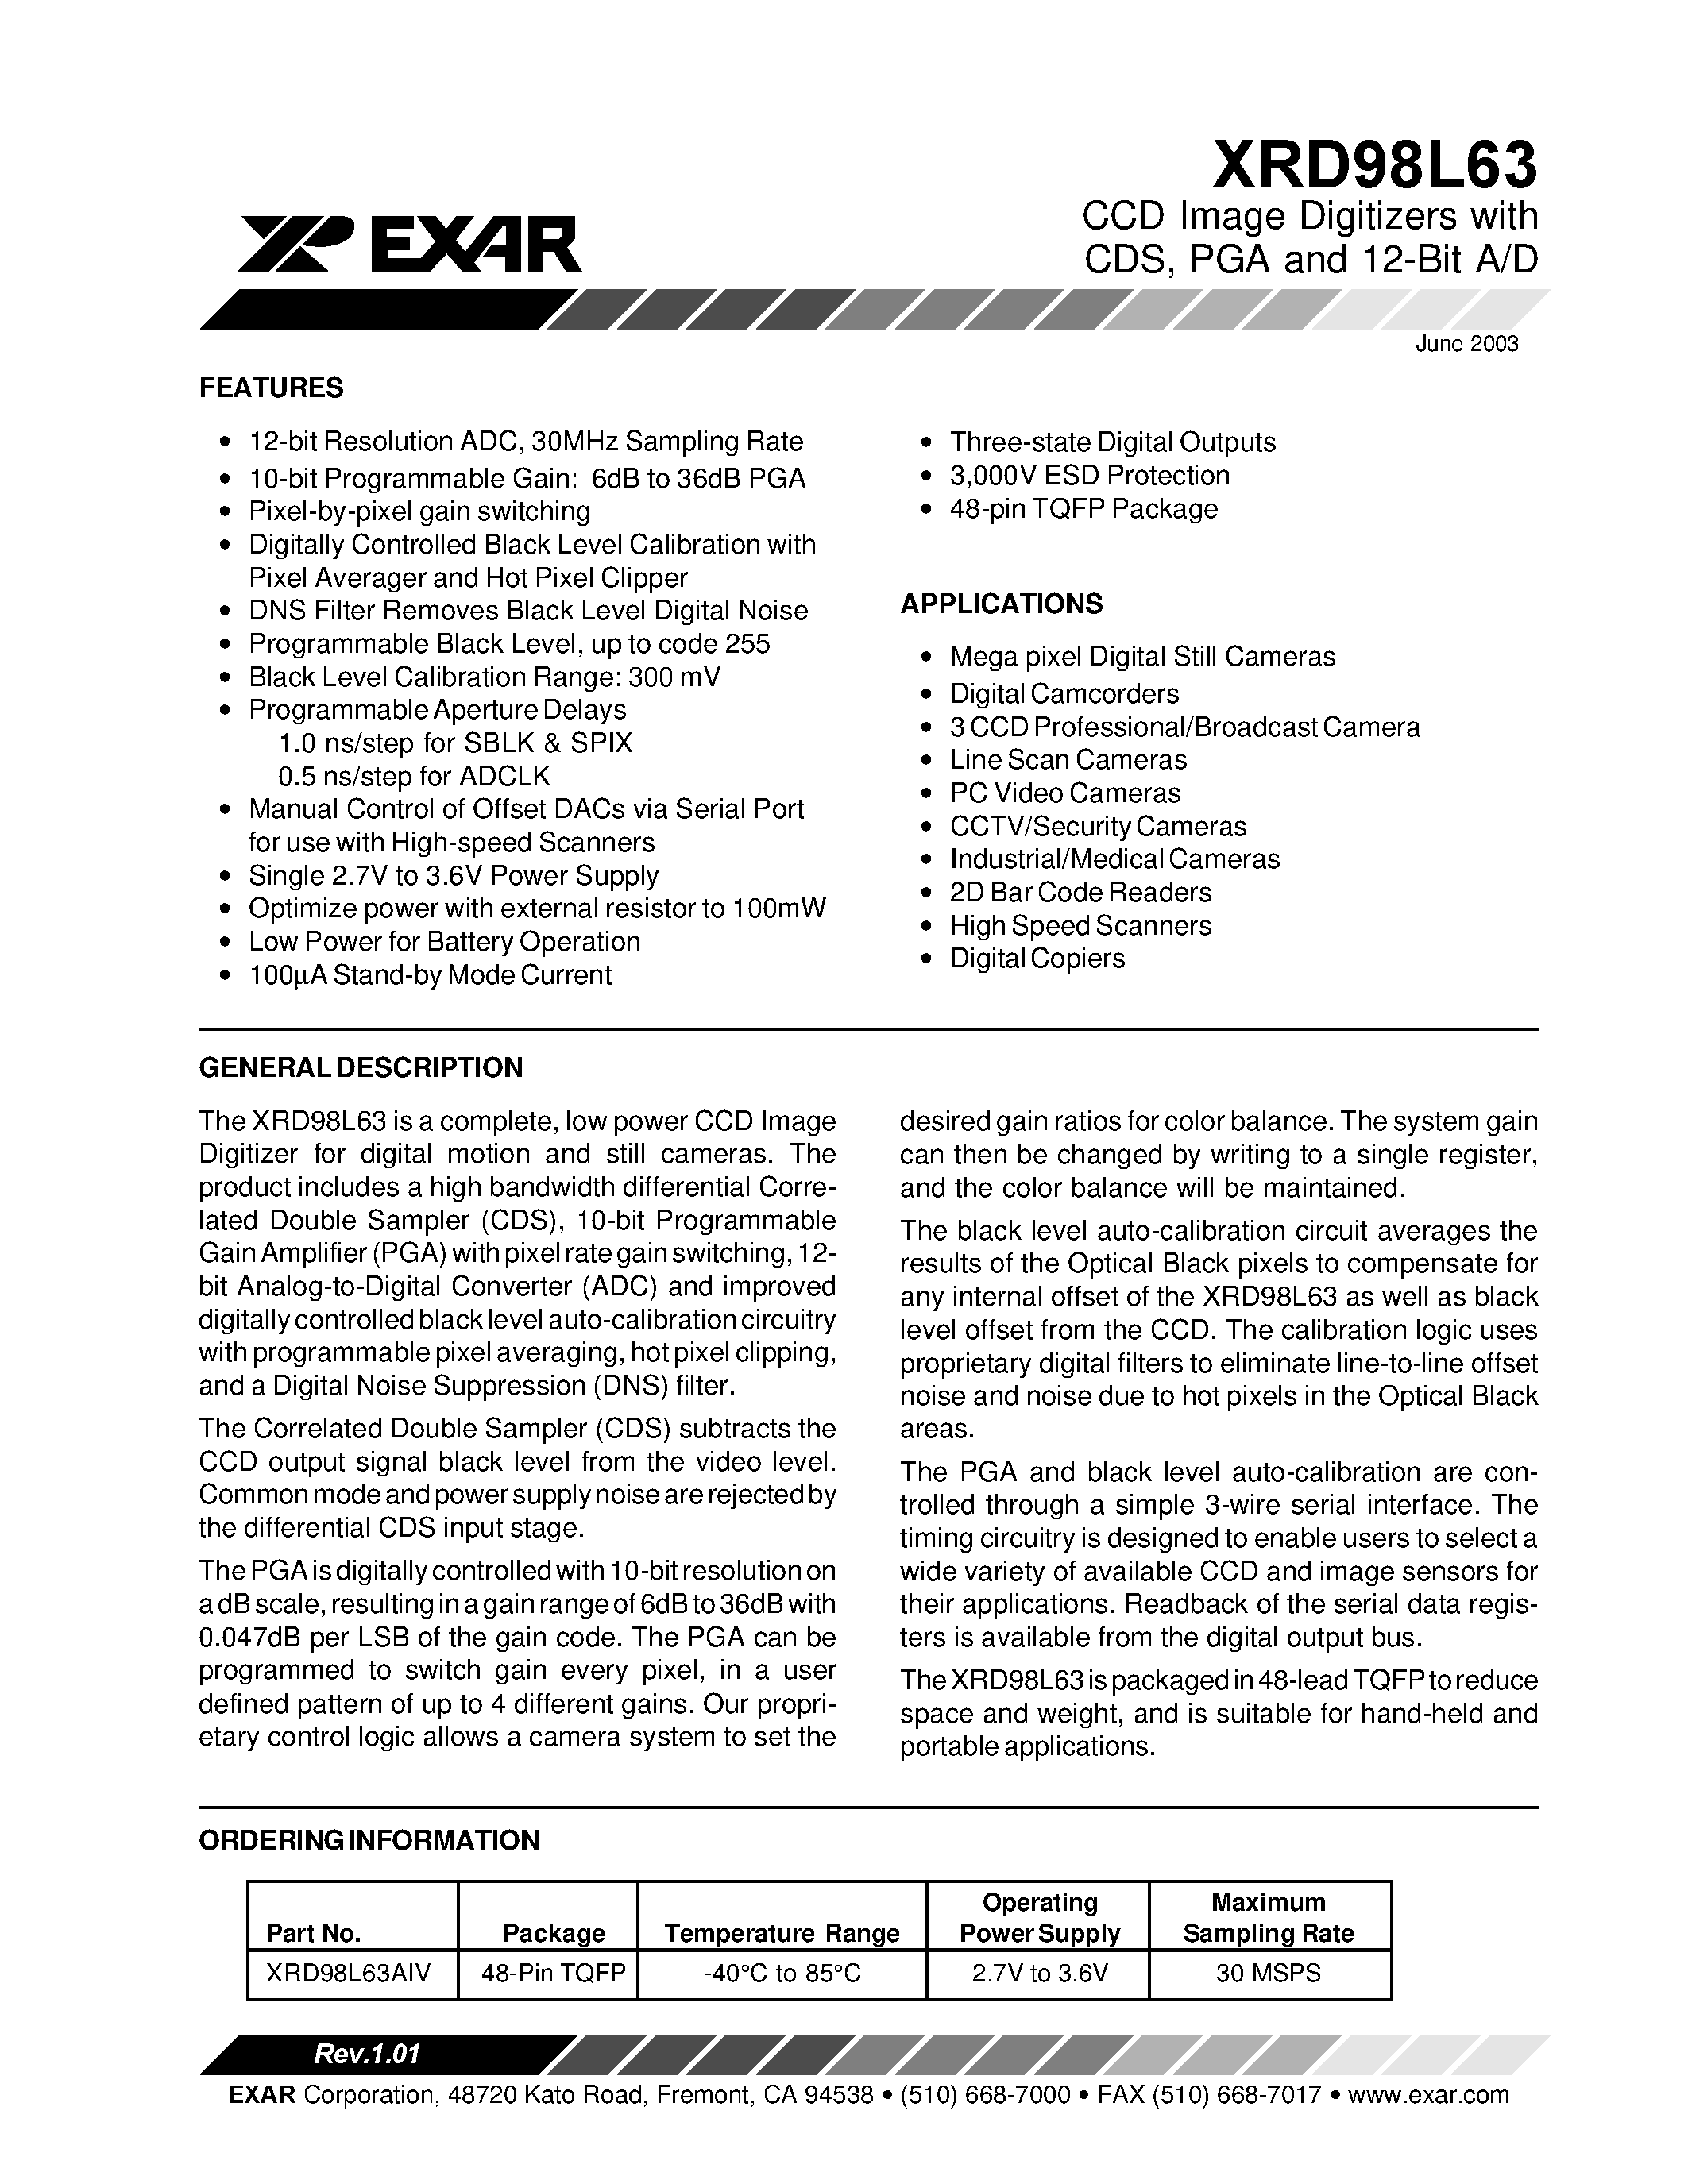 Datasheet XRD98L63 - CCD Image Digitizers with CDS/ PGA and 12-Bit A/D page 1